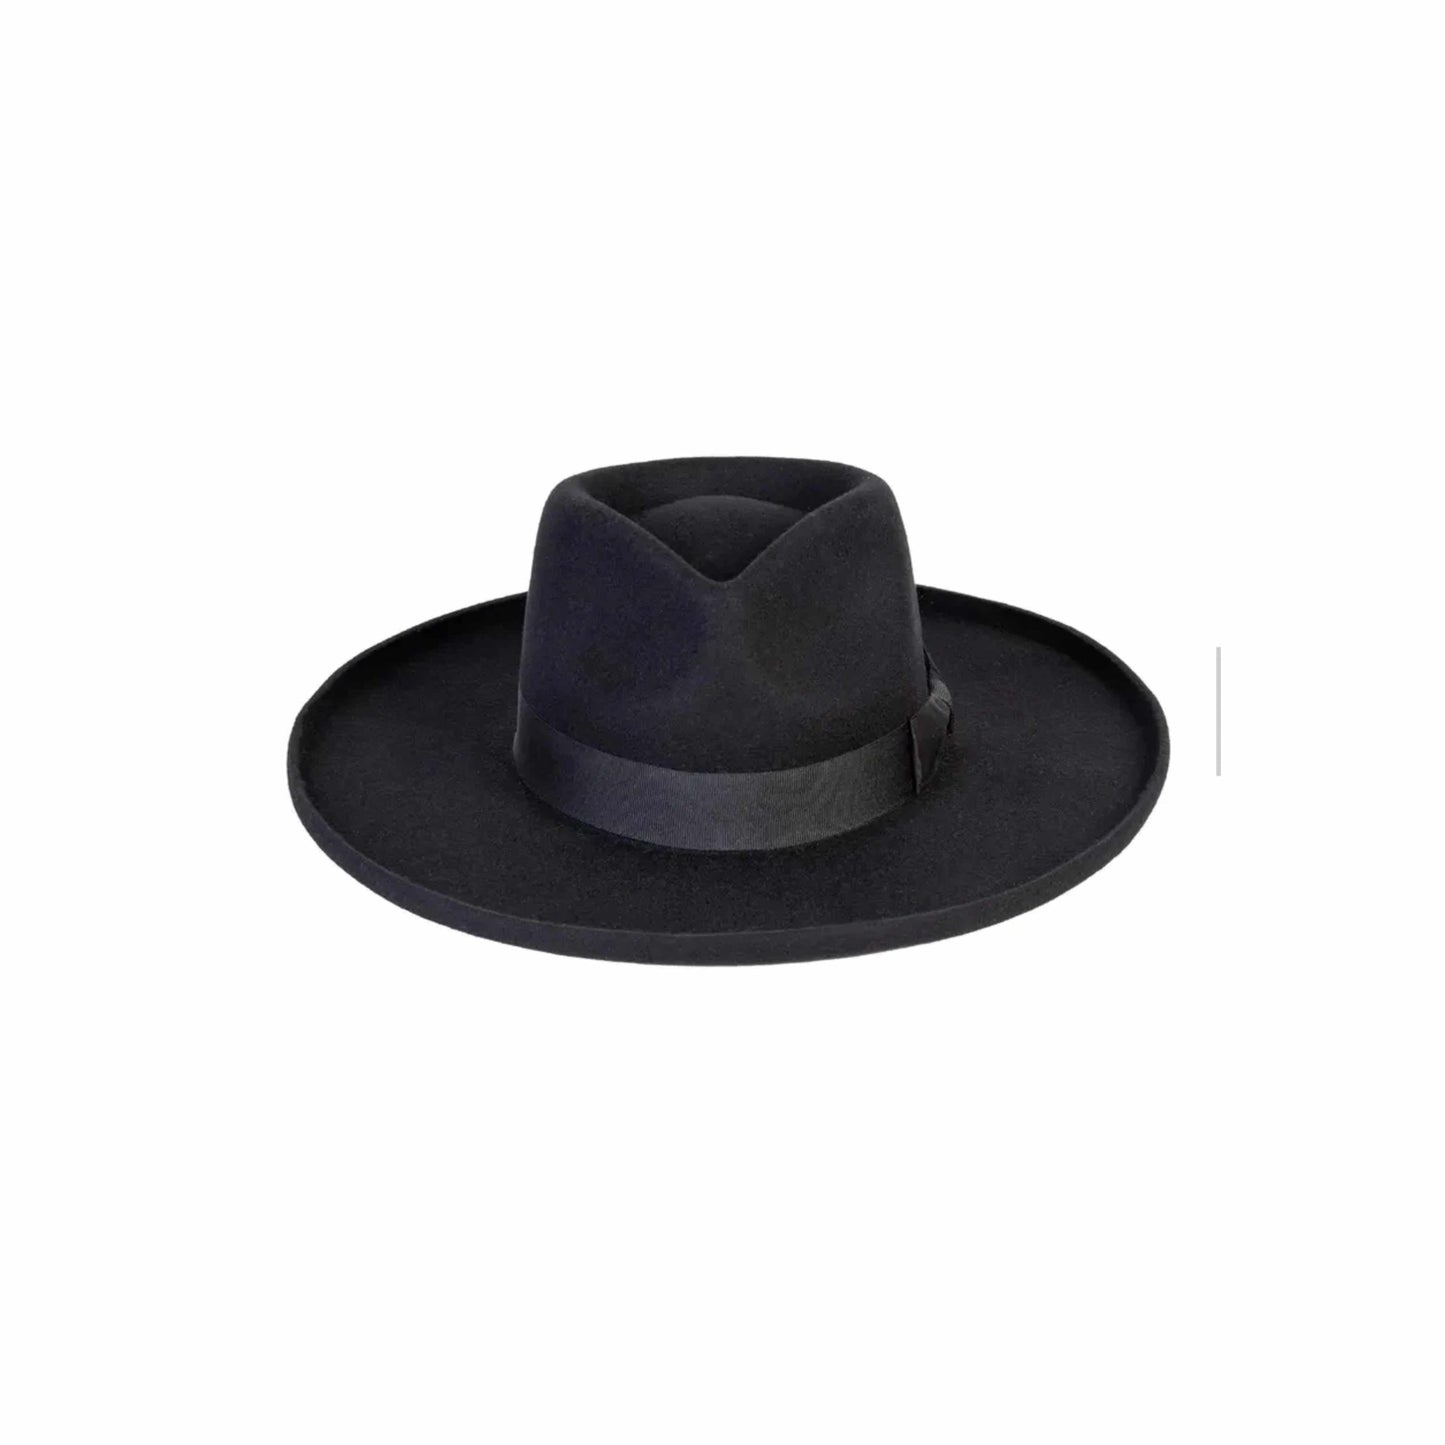 The Florence Hat